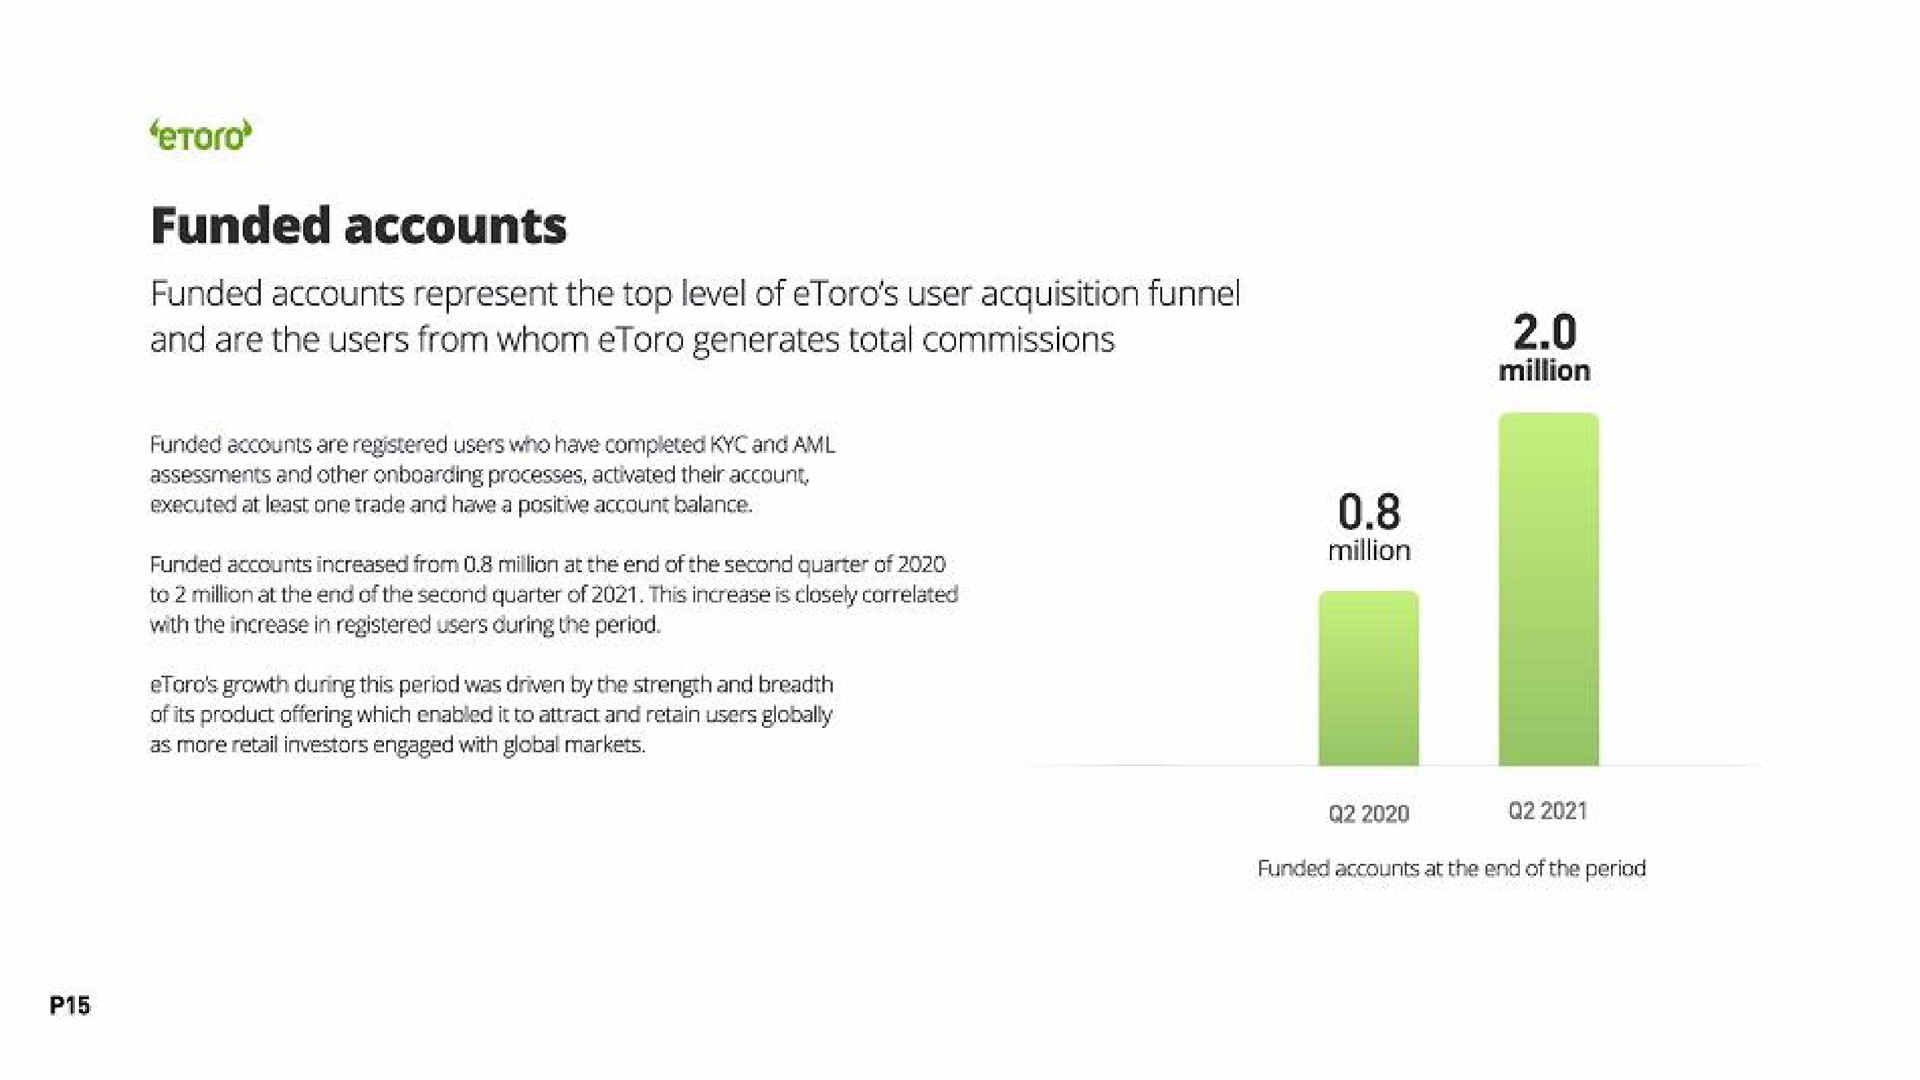 funded accounts funded accounts represent the top level of user acquisition funnel and are the users from whom generates total commissions | eToro